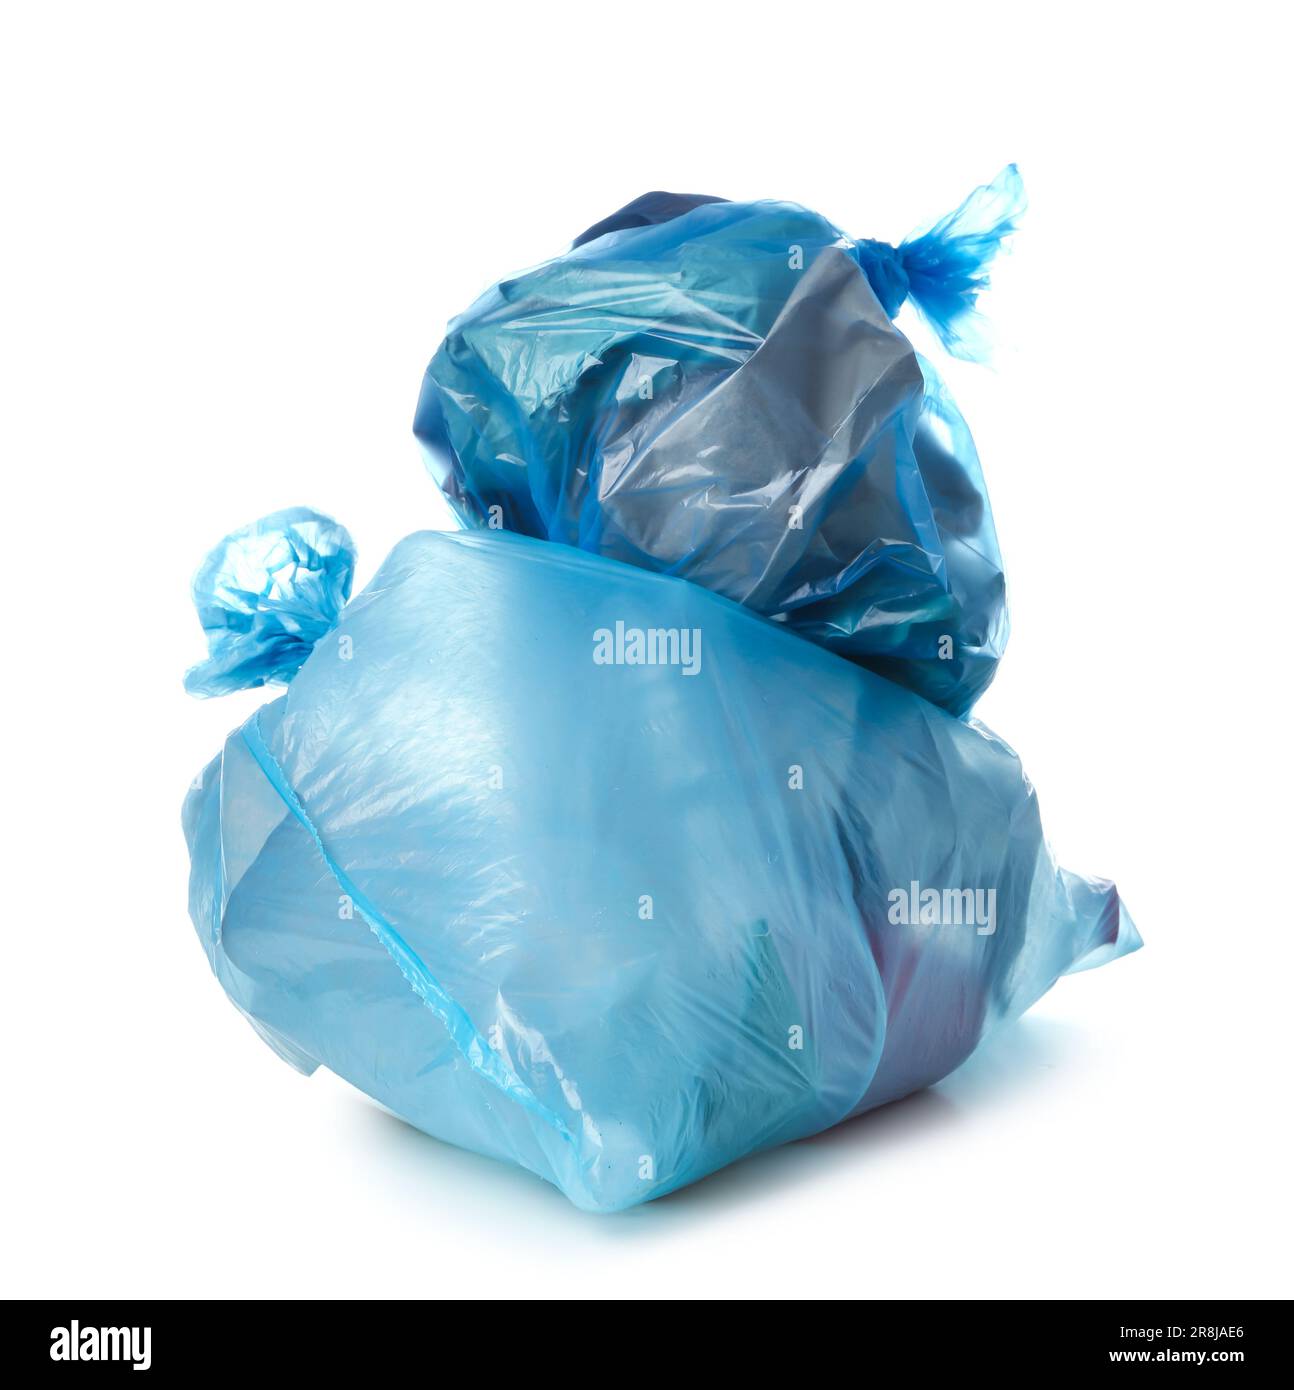 https://c8.alamy.com/comp/2R8JAE6/garbage-bags-with-different-trash-isolated-on-white-background-2R8JAE6.jpg